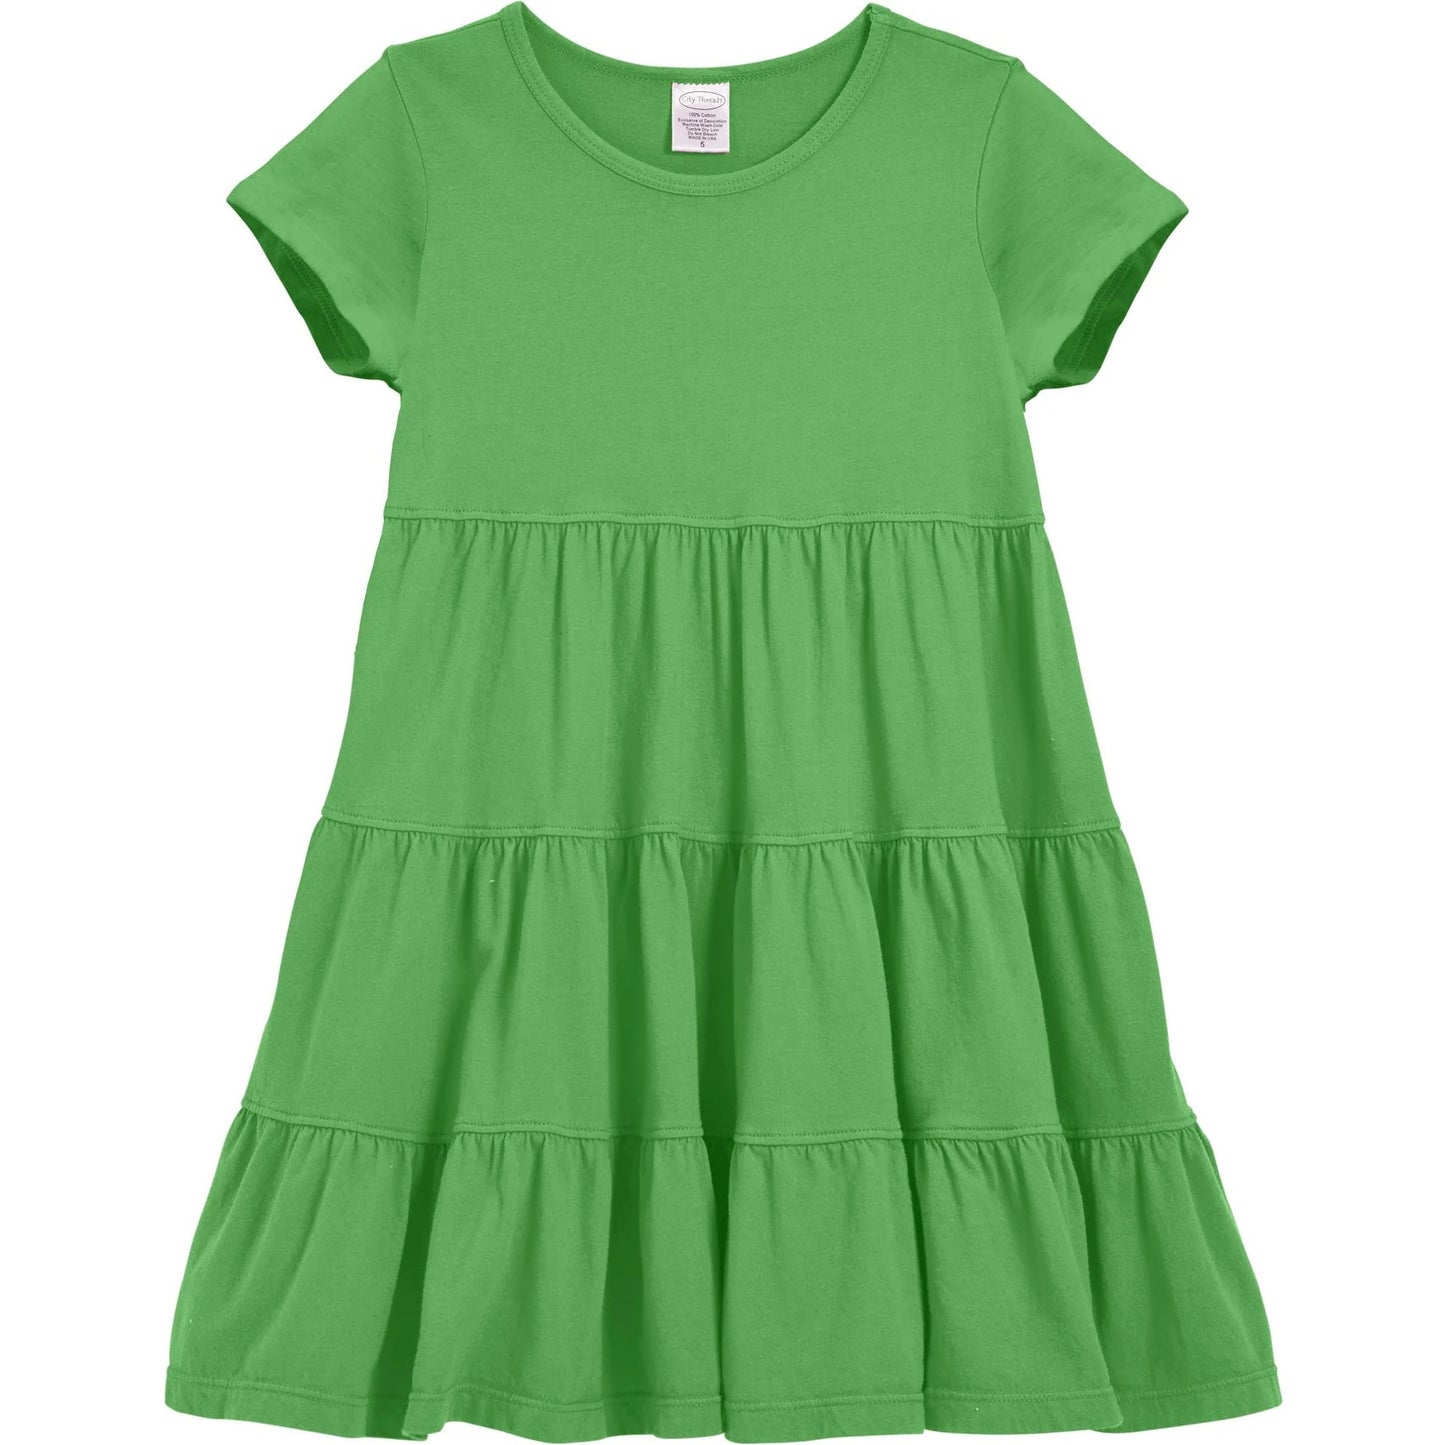 Made in USA Short Sleeve Baby / Toddler Dress - Green - Tiered Cotton